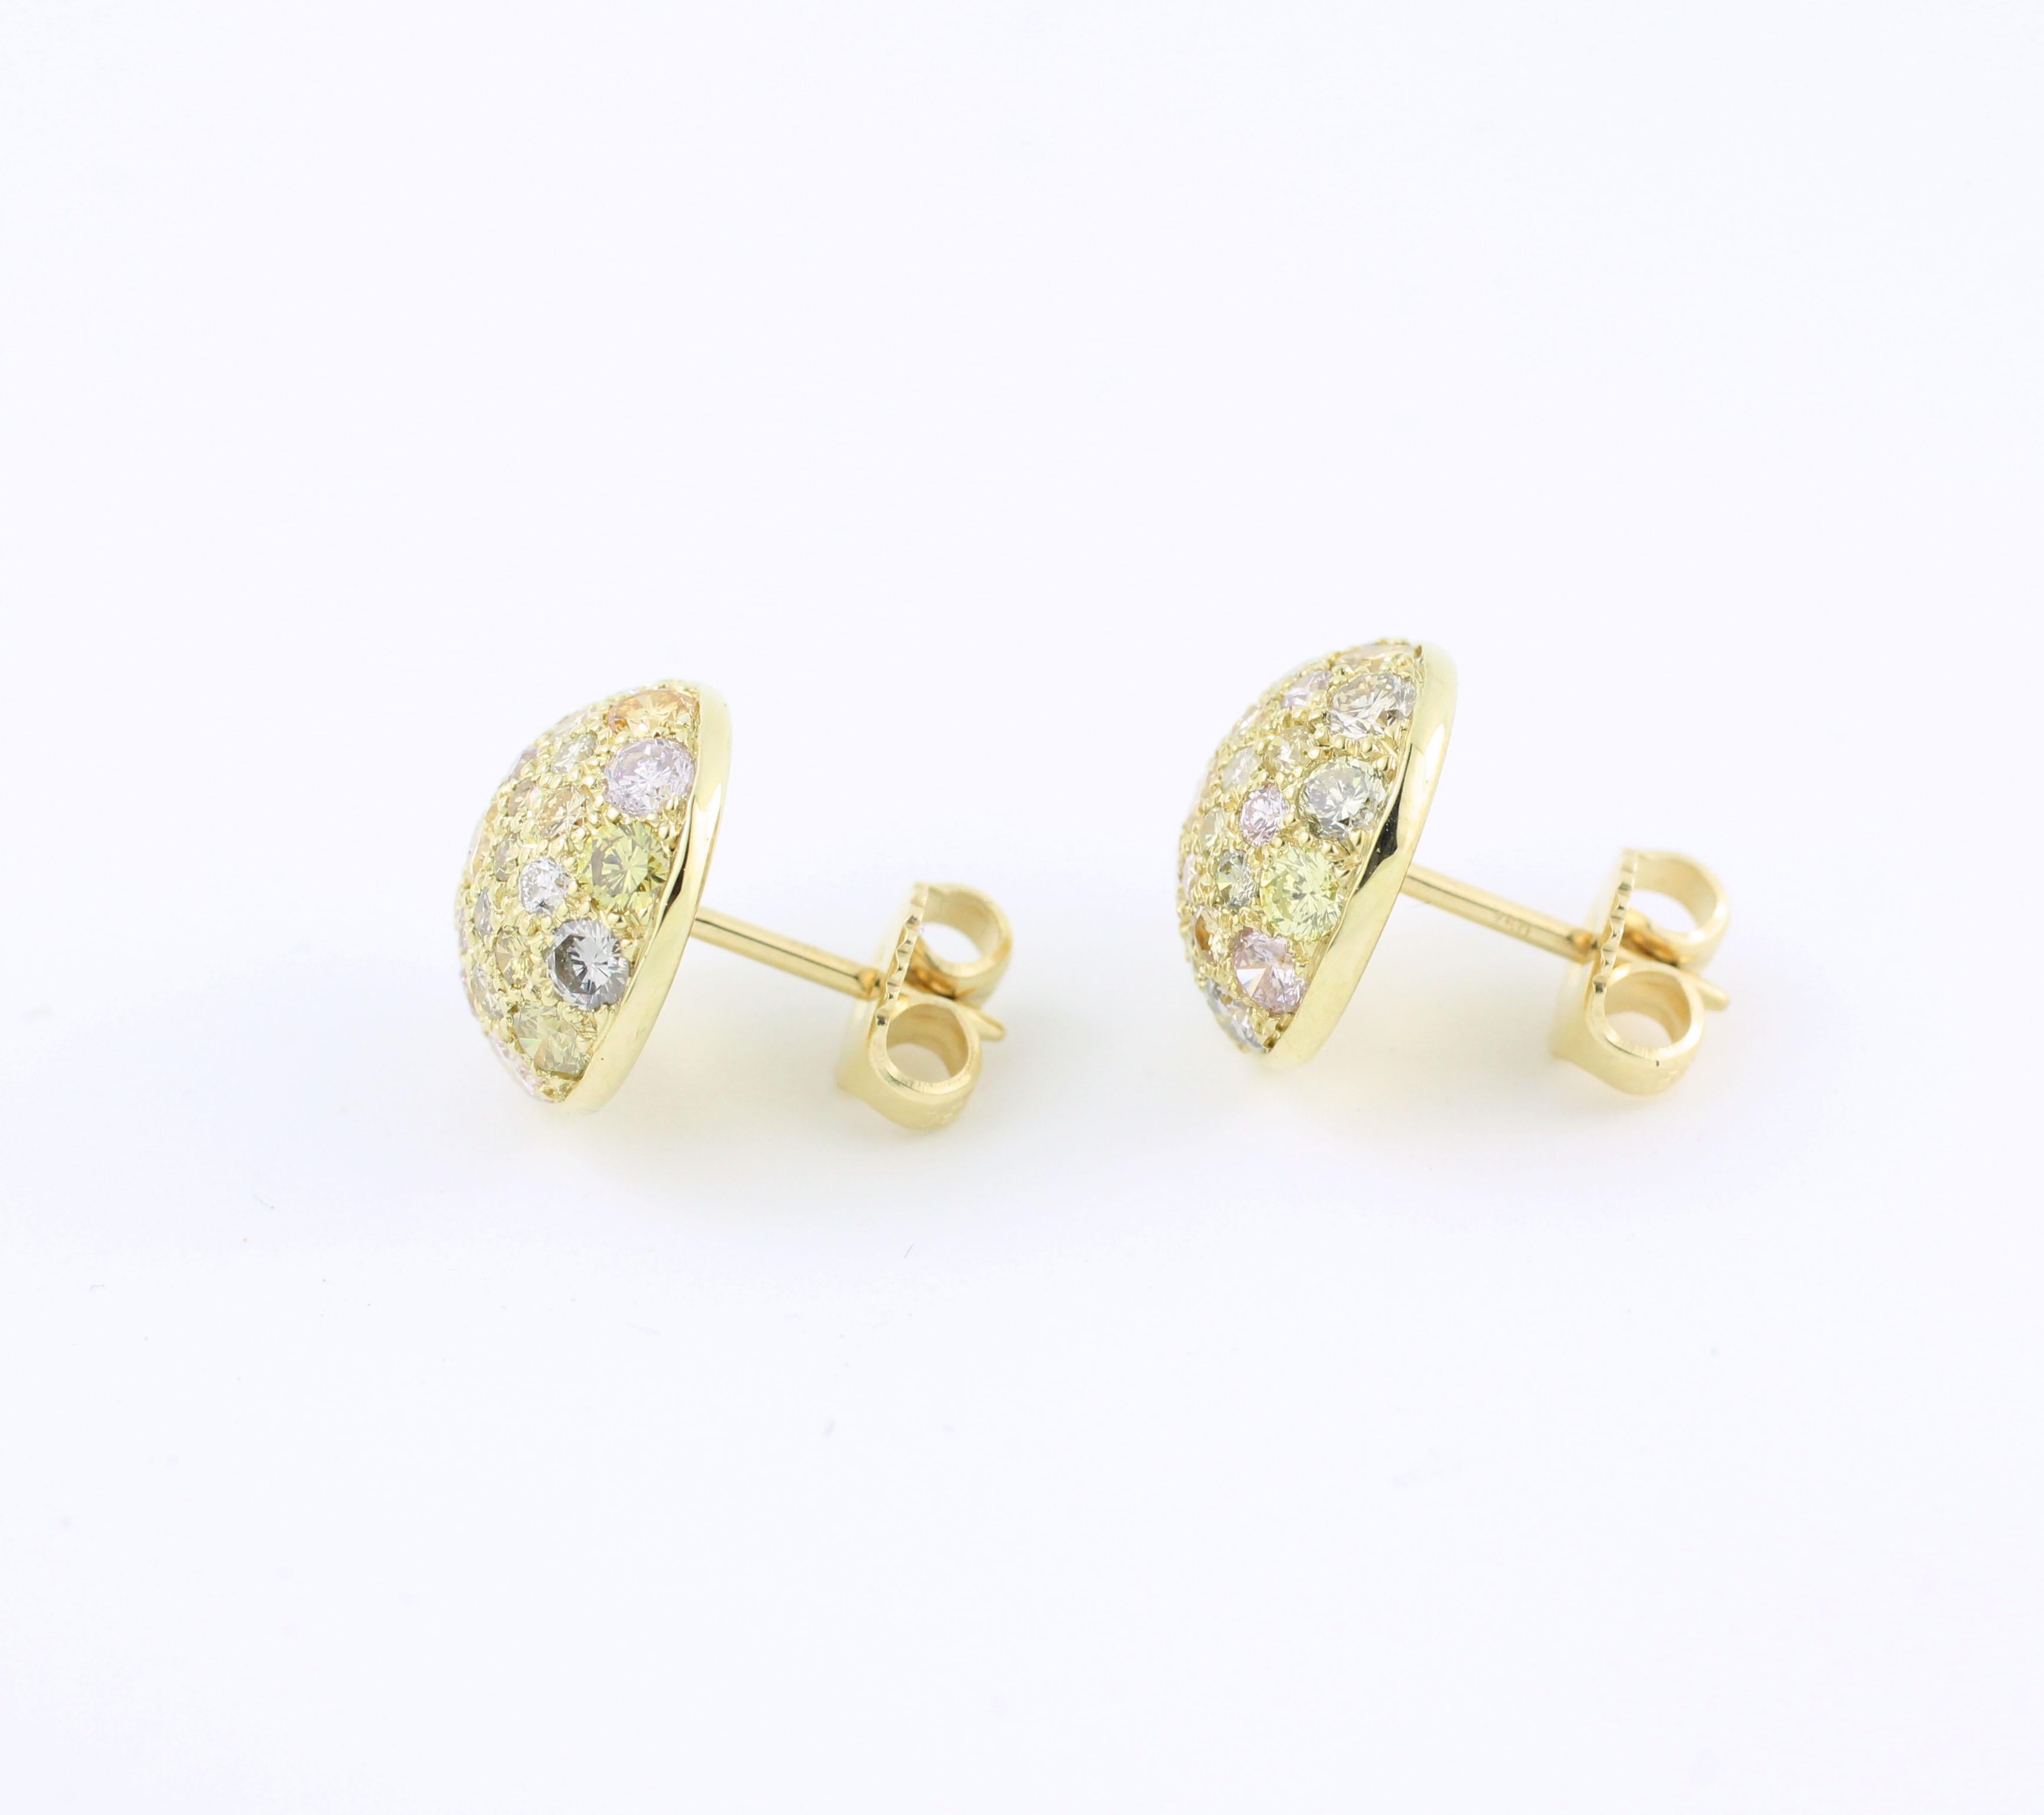 Brilliant Cut Julius Cohen Champagne Diamond Dome Earrings in 18 Kt Gold For Sale